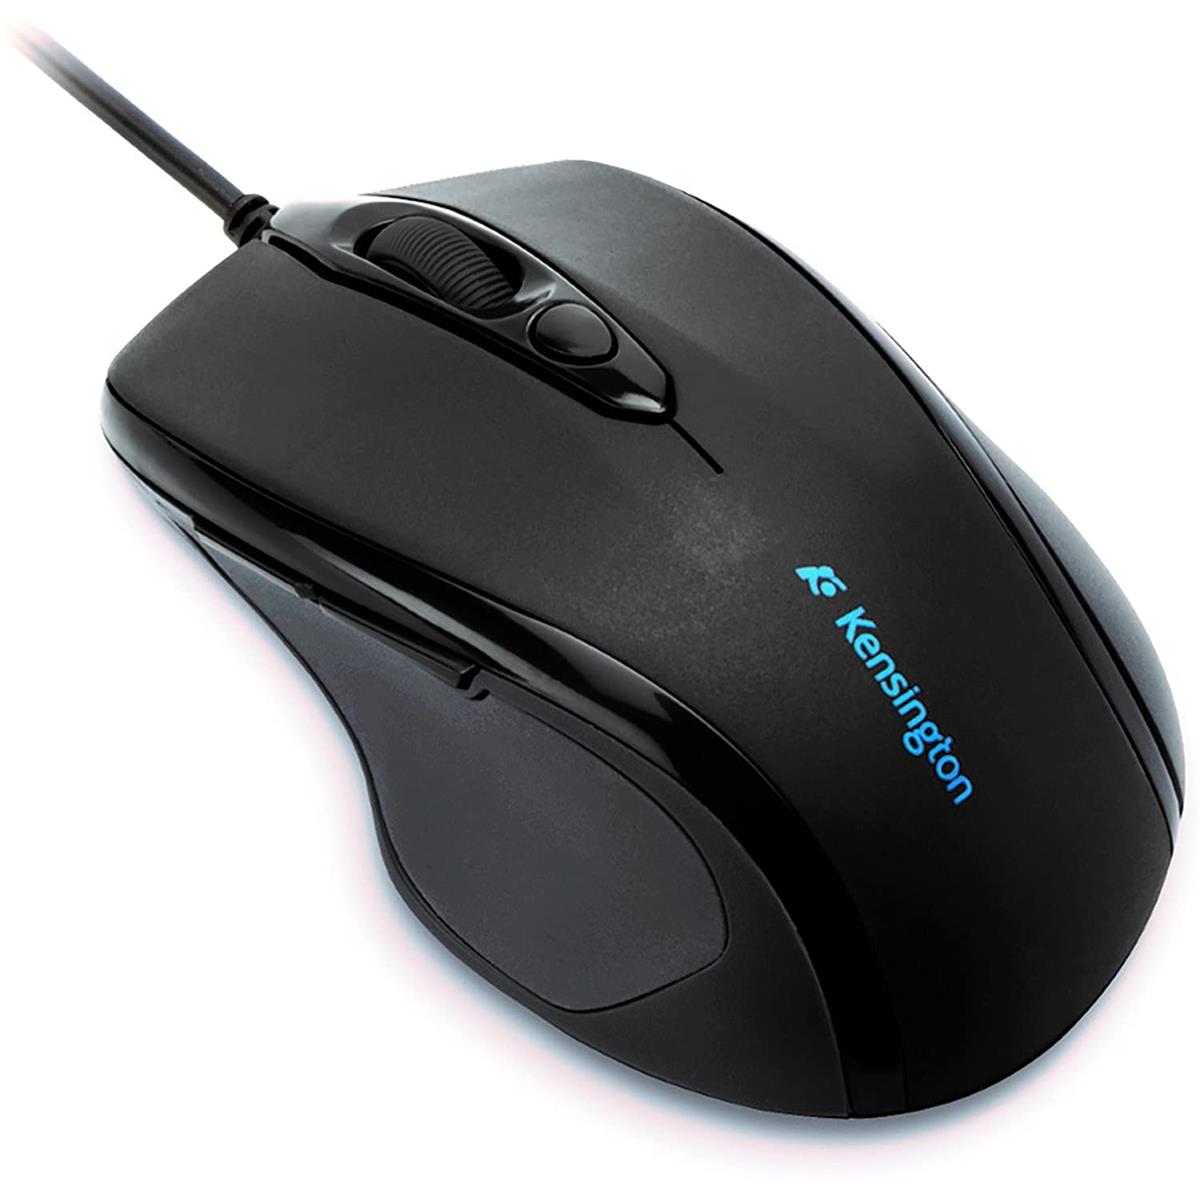 Image of Kensington Pro Fit Wired Mid-Size Right-Handed USB Mouse for Windows/Macs